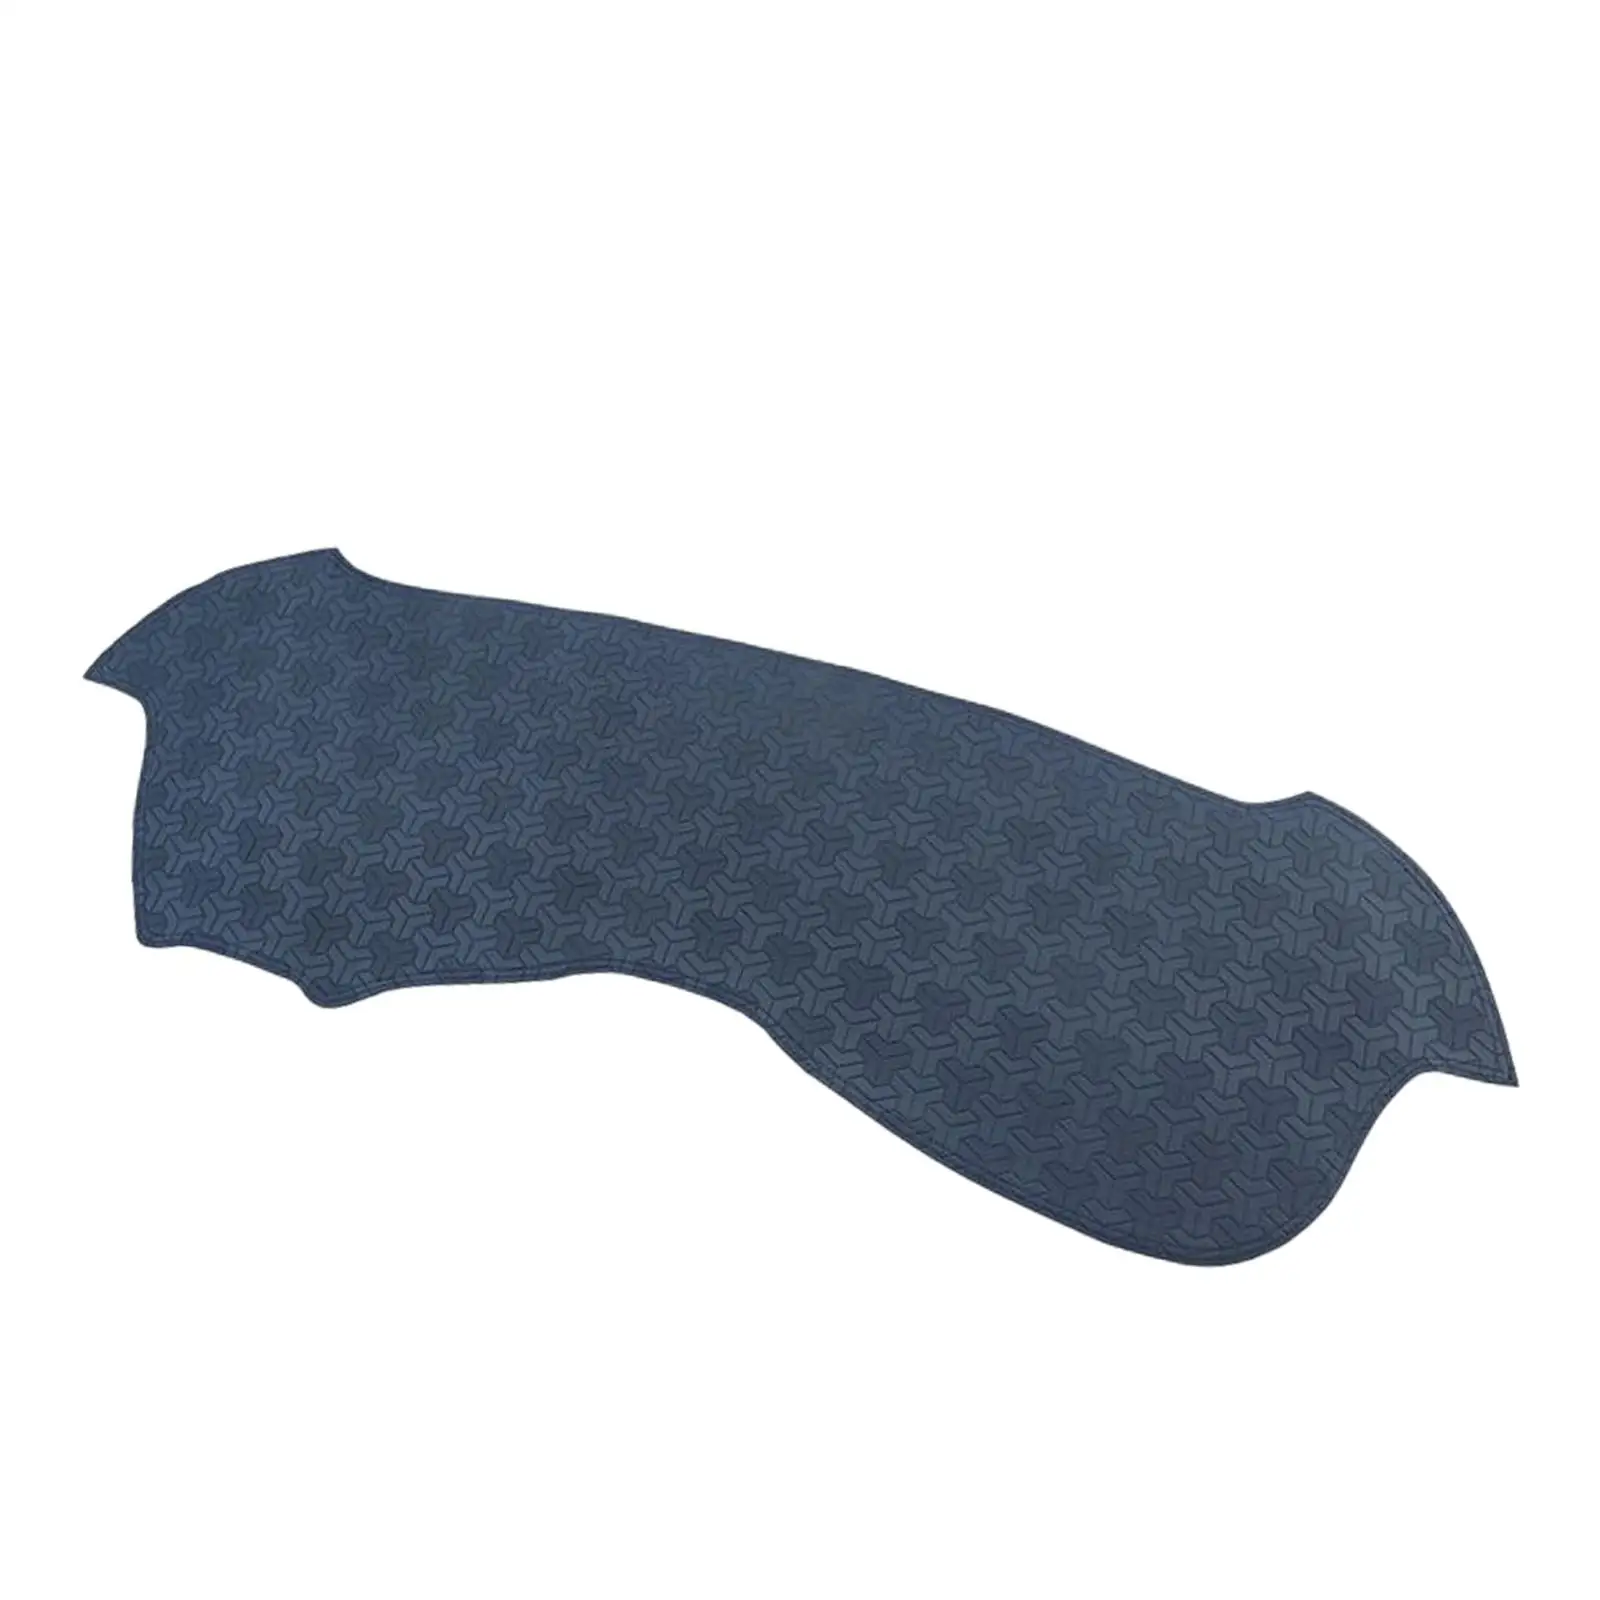 Dashboard Mat Durable Carpet Dashboard Pad for Byd Yuan Plus Auto Accessories